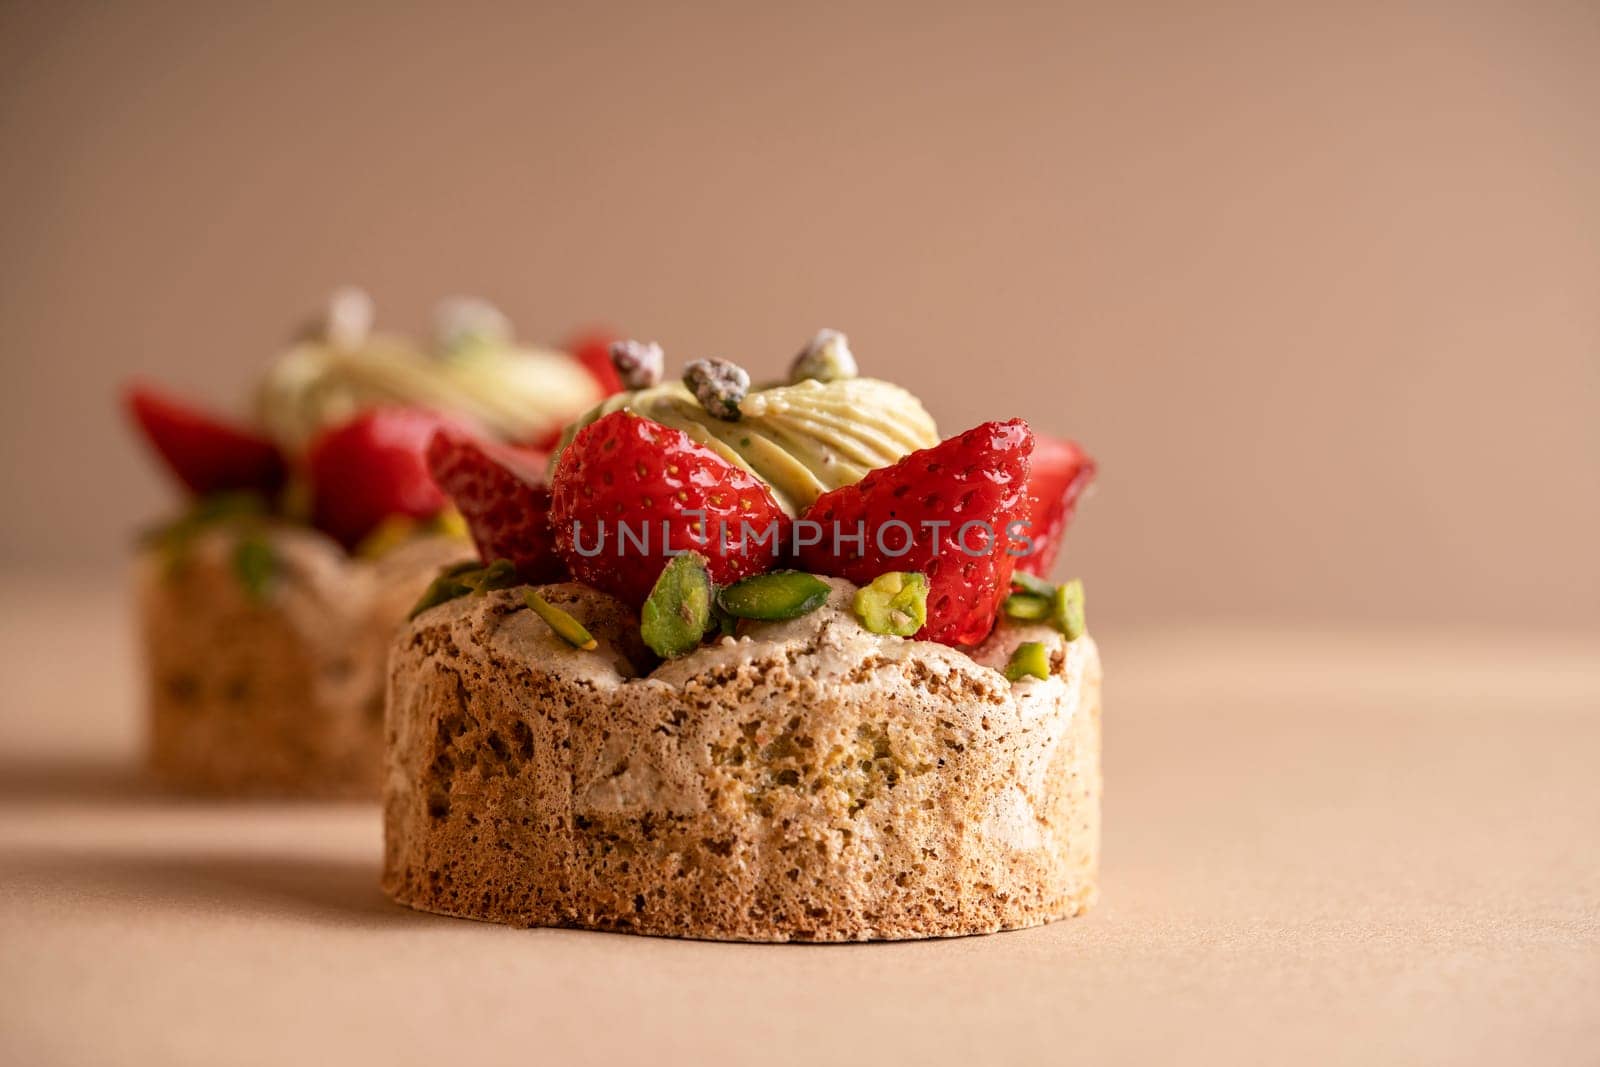 A delicious dessert composed of two decadent strawberry and pistachio cakes by A_Karim